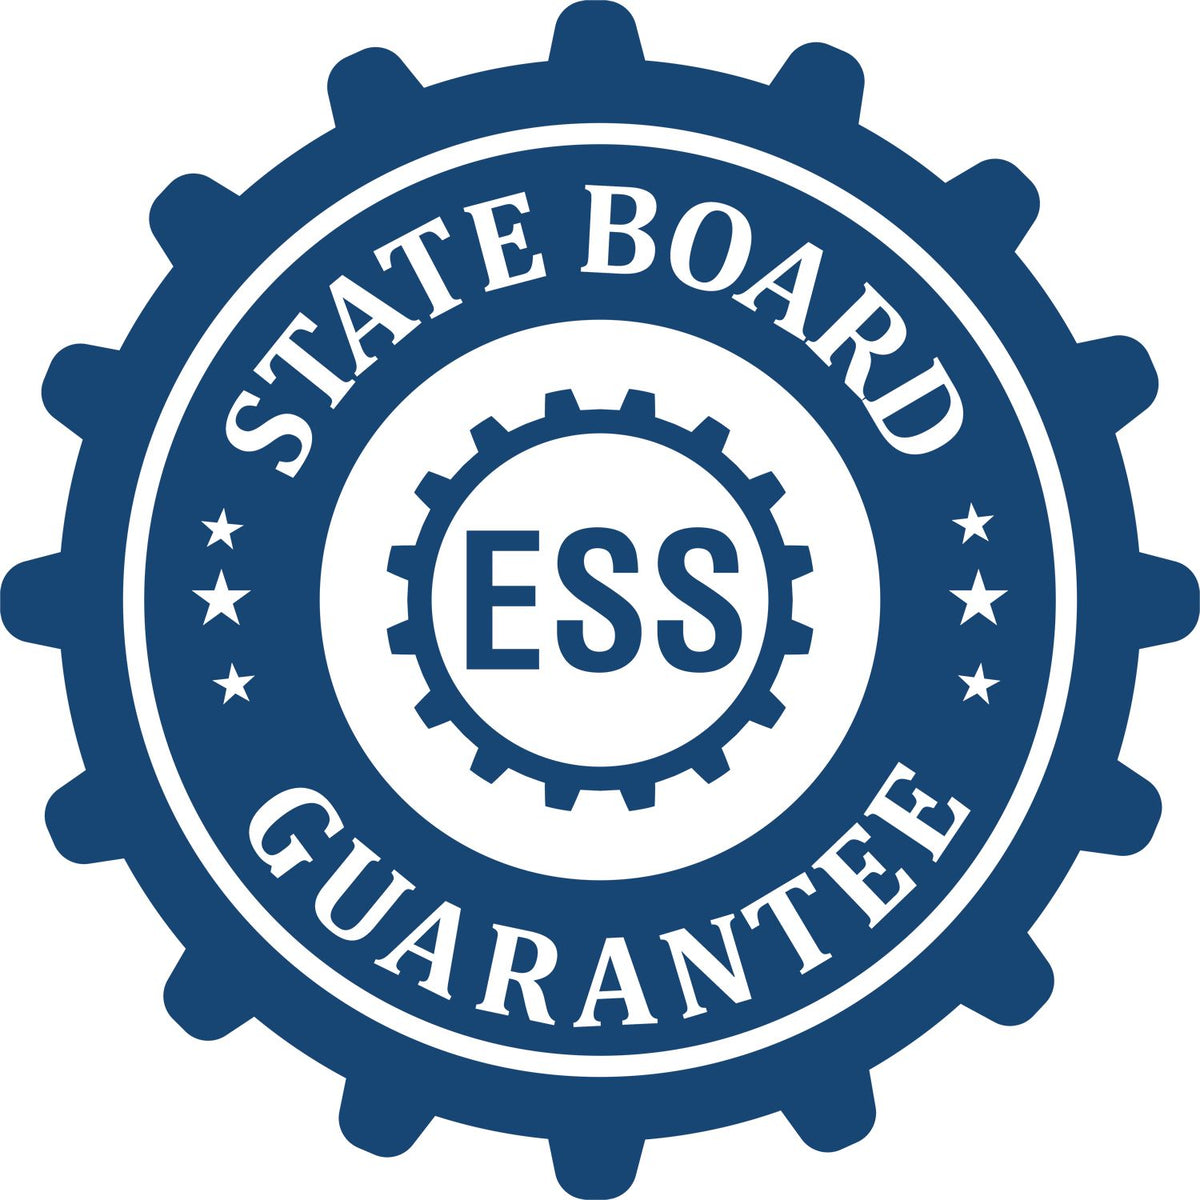 An emblem in a gear shape illustrating a state board guarantee for the Premium MaxLight Pre-Inked Guam Landscape Architectural Stamp product.